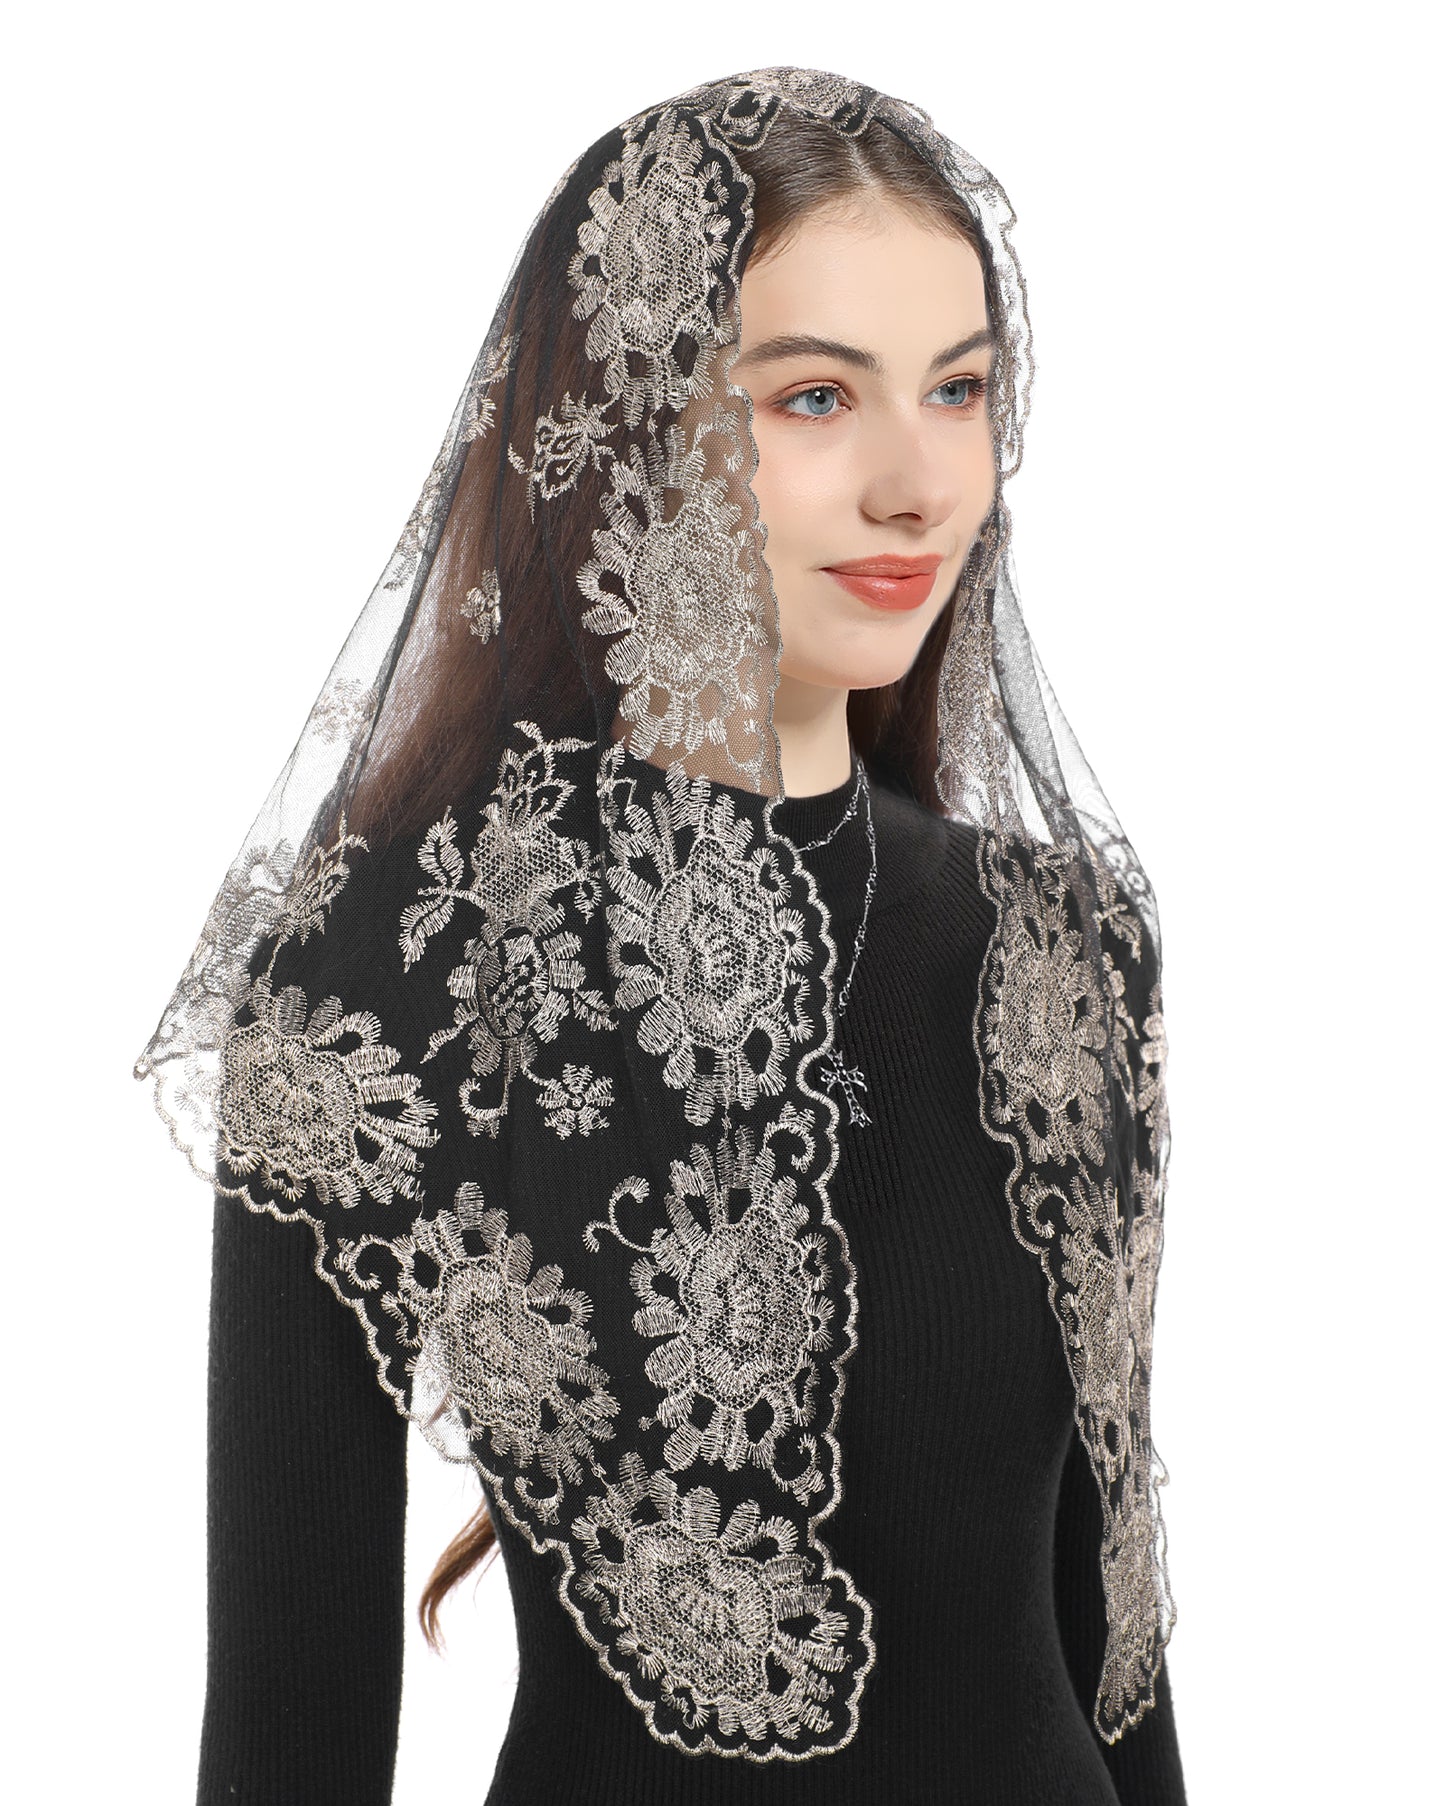 Bozidol Embroidered Church Triangle Veil - Embroidered Shepherds Bouquet Combined With Catholic Church Triangle Lace Veil